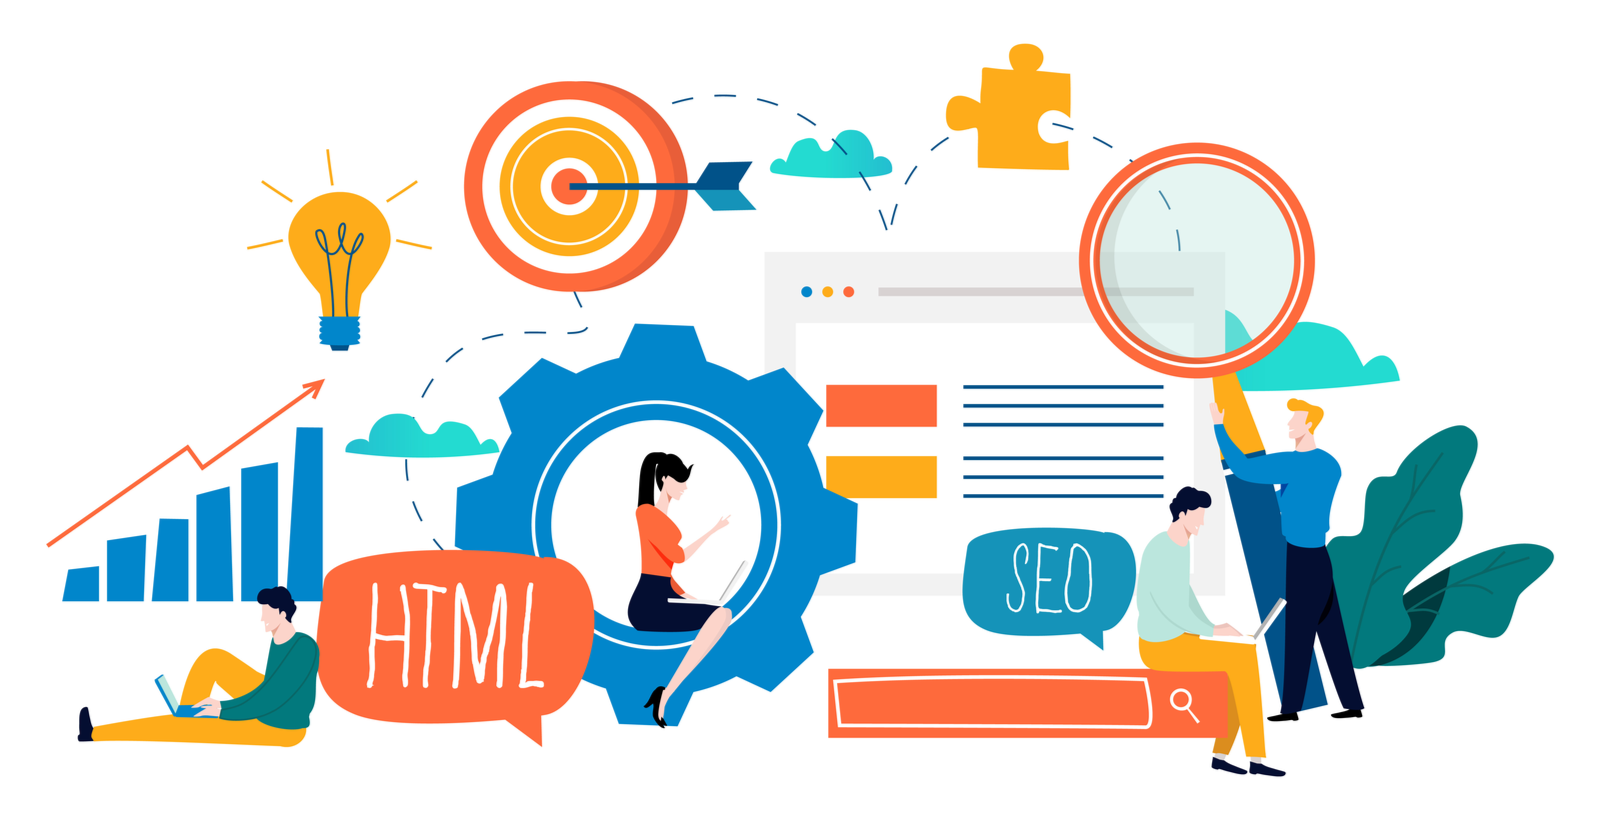 HTML & Coding questions answered in Ask an SEO